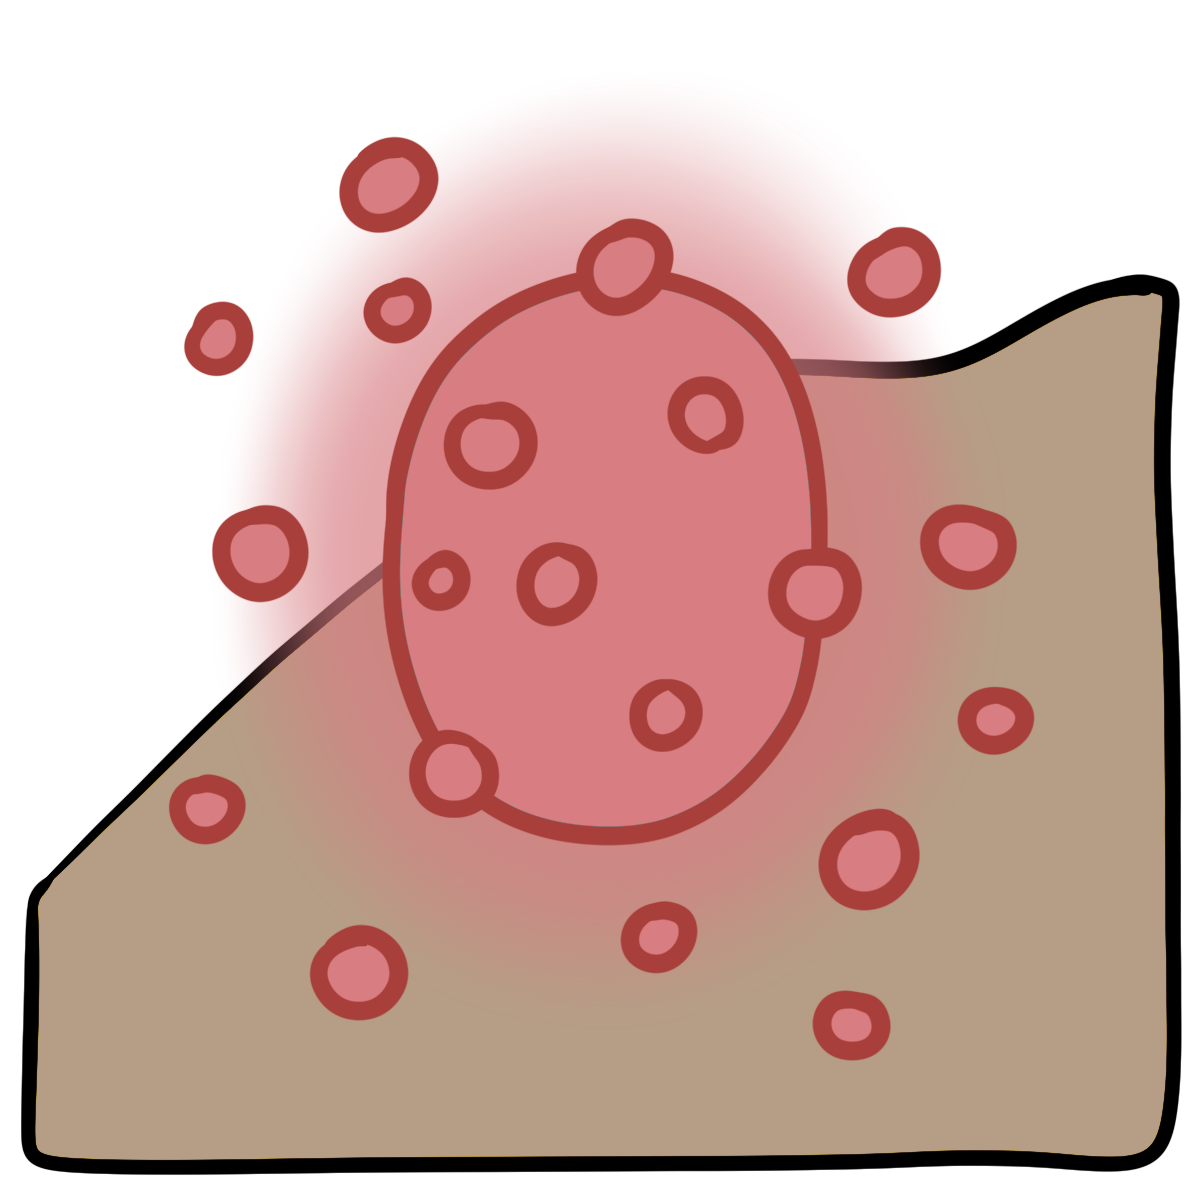 A pink glowing oval with pink dots around it. Curved dark beige skin fills the bottom half of the background.